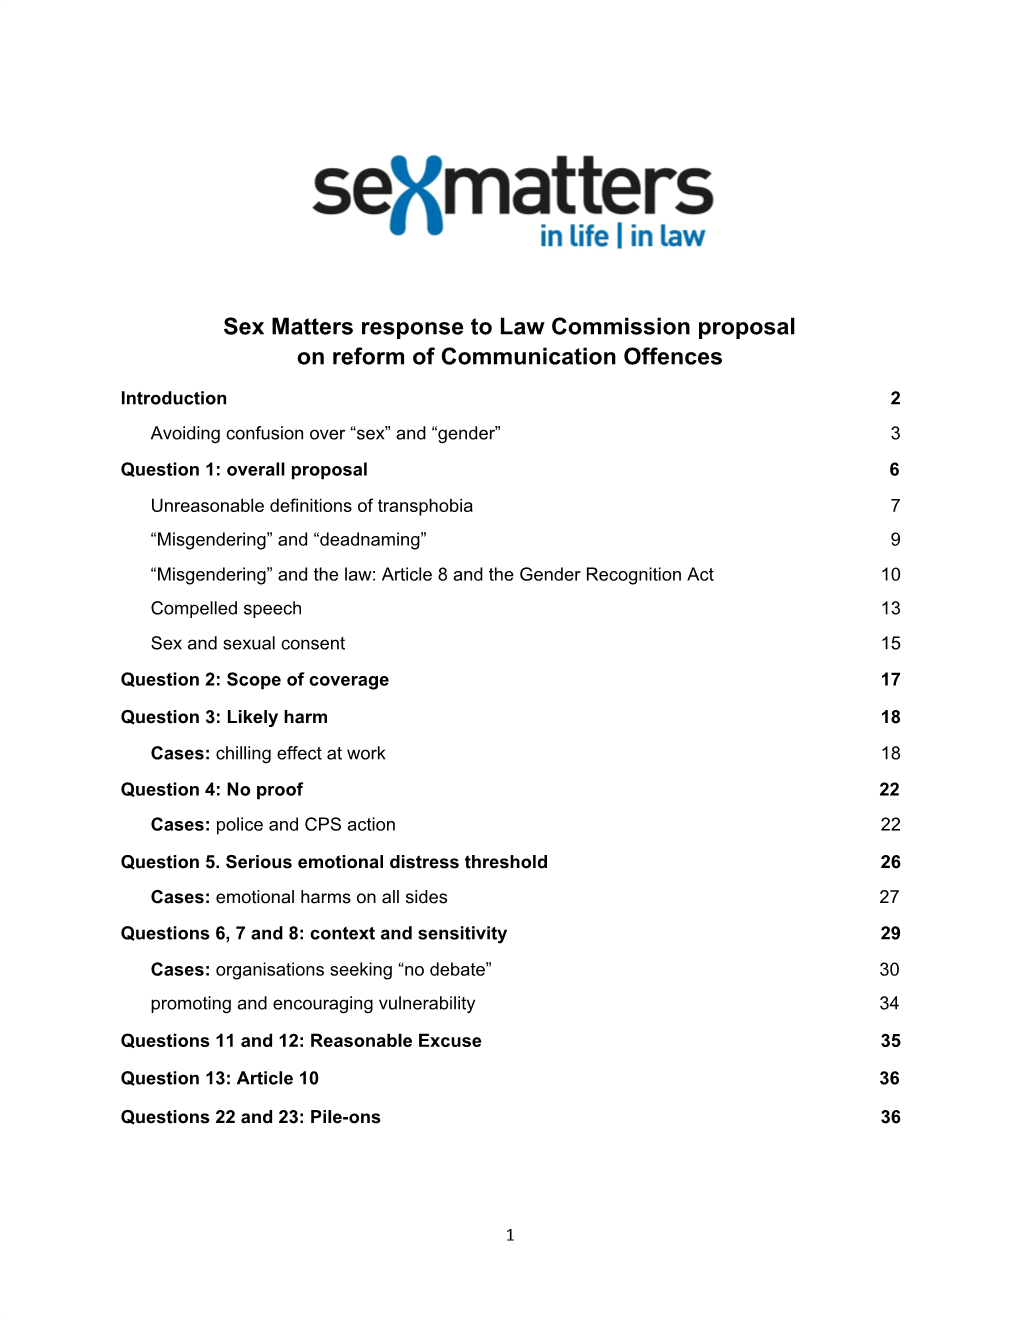 Sex Matters Response to Law Commission Proposal on Reform of Communication Offences